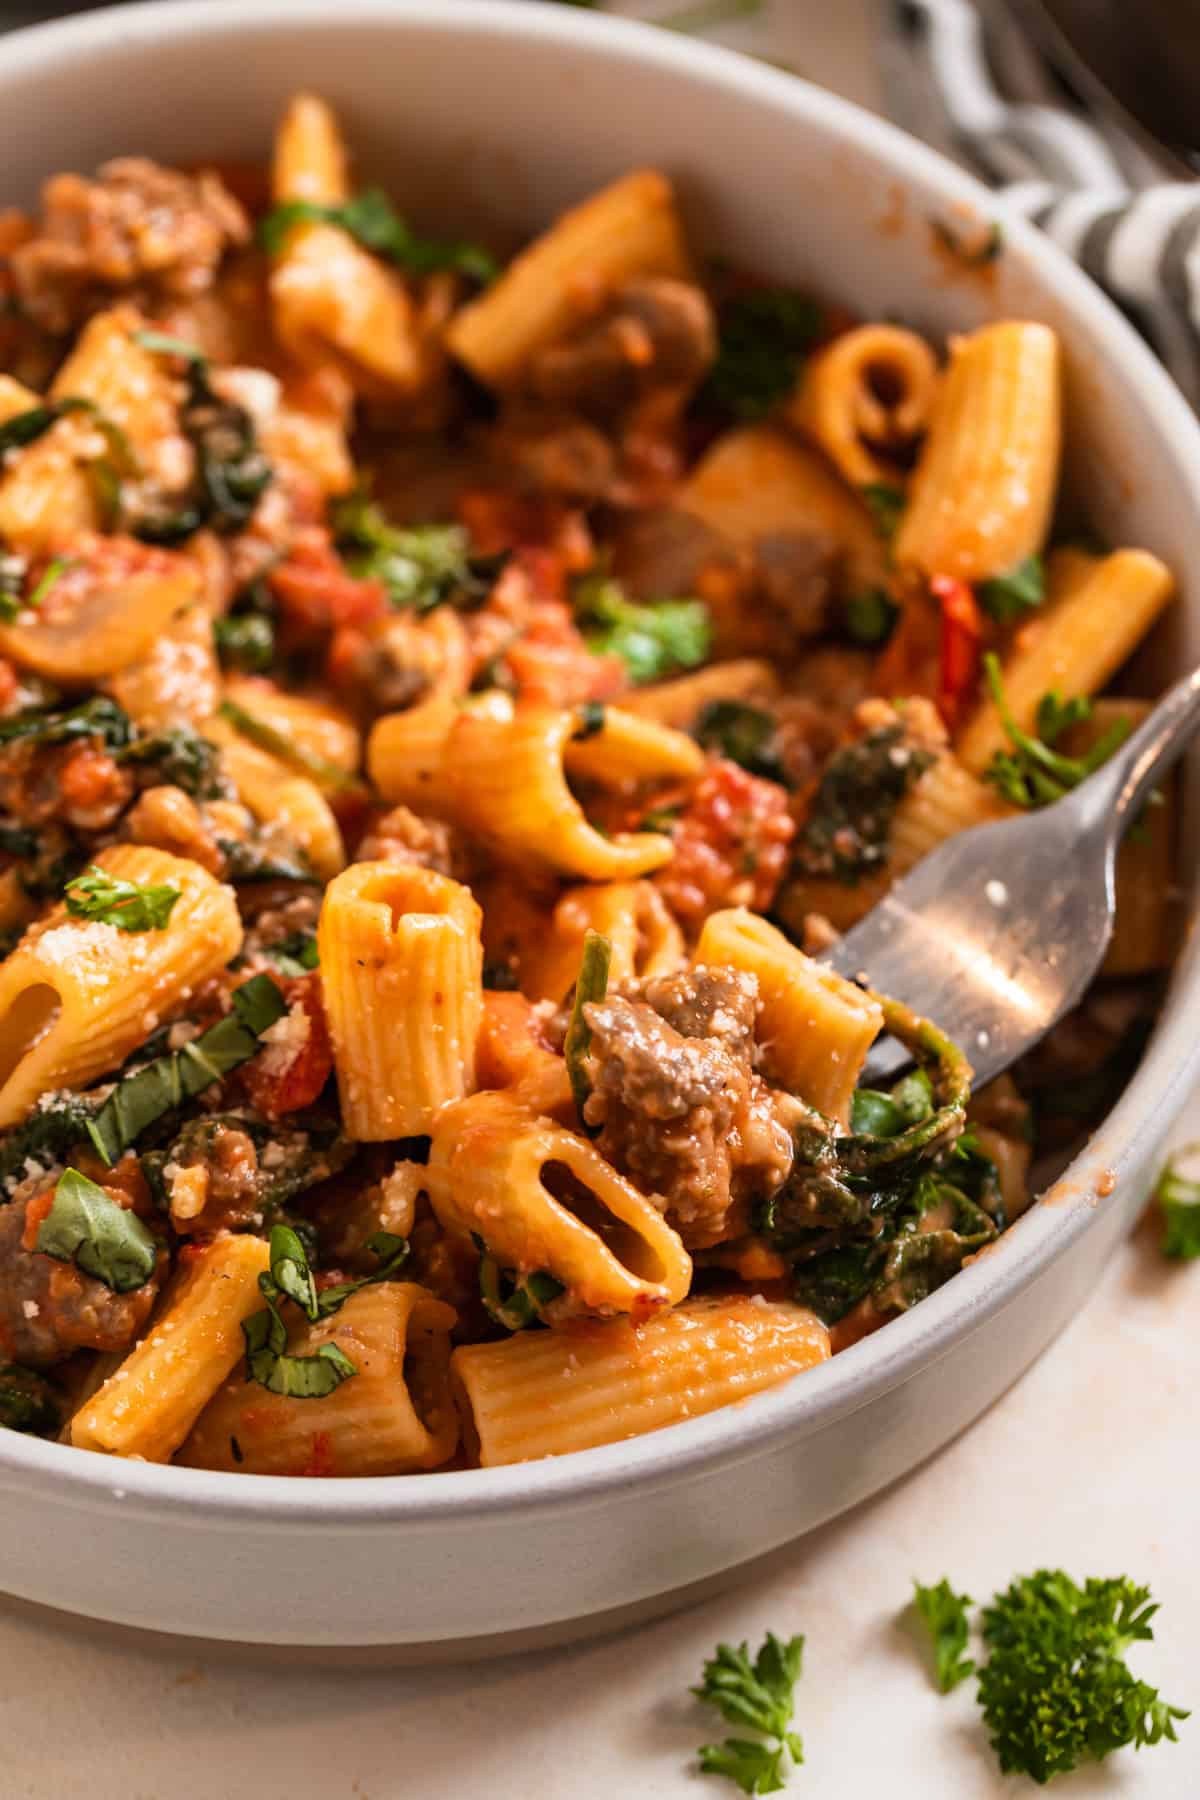 Bowl of pasta with Italian sausage, tomatoes and spinach with forkful of pasta.